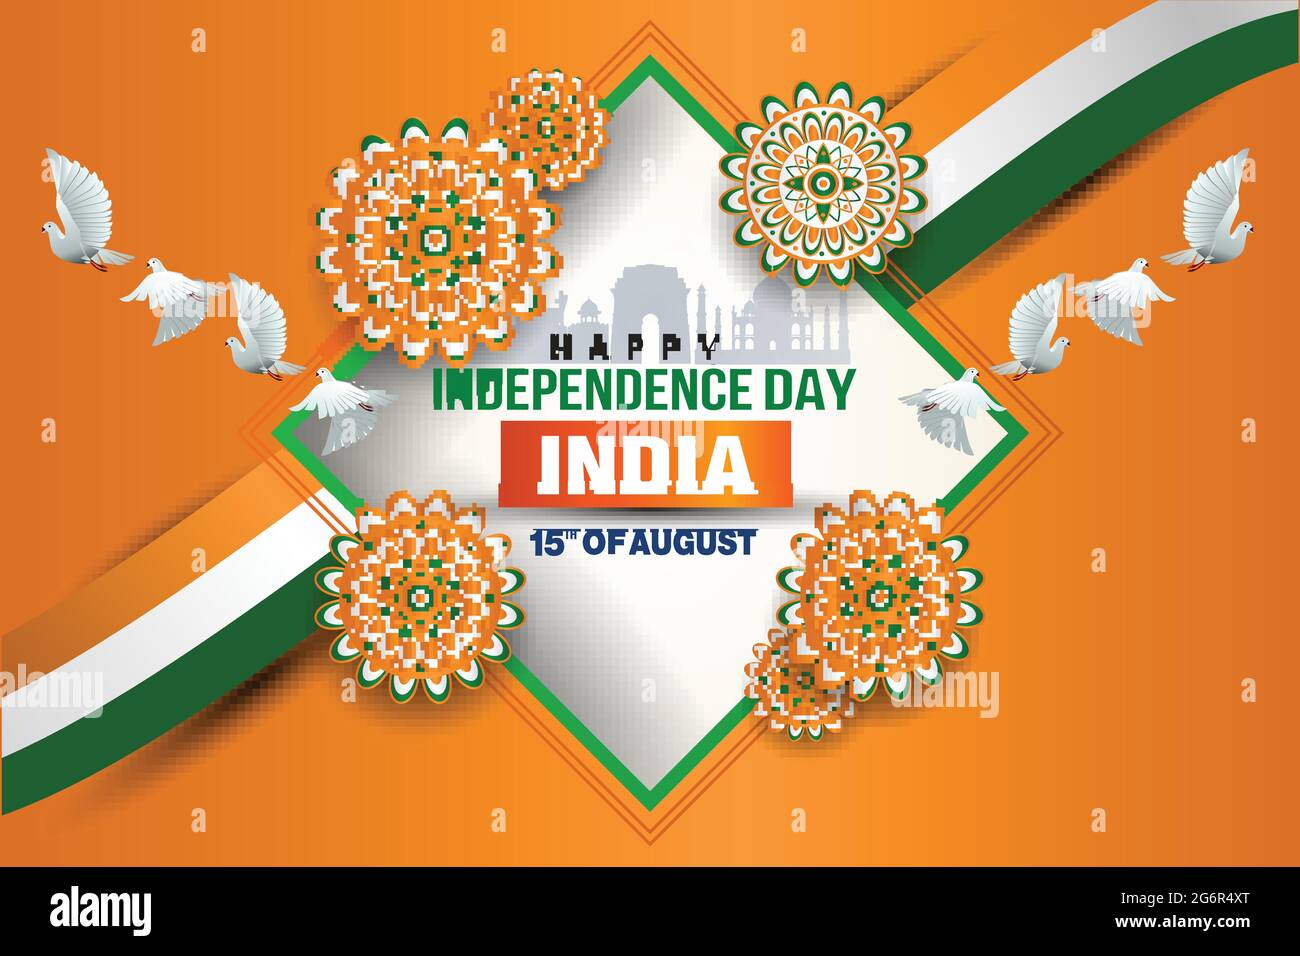 happy independence day India 15th August. vector illustration